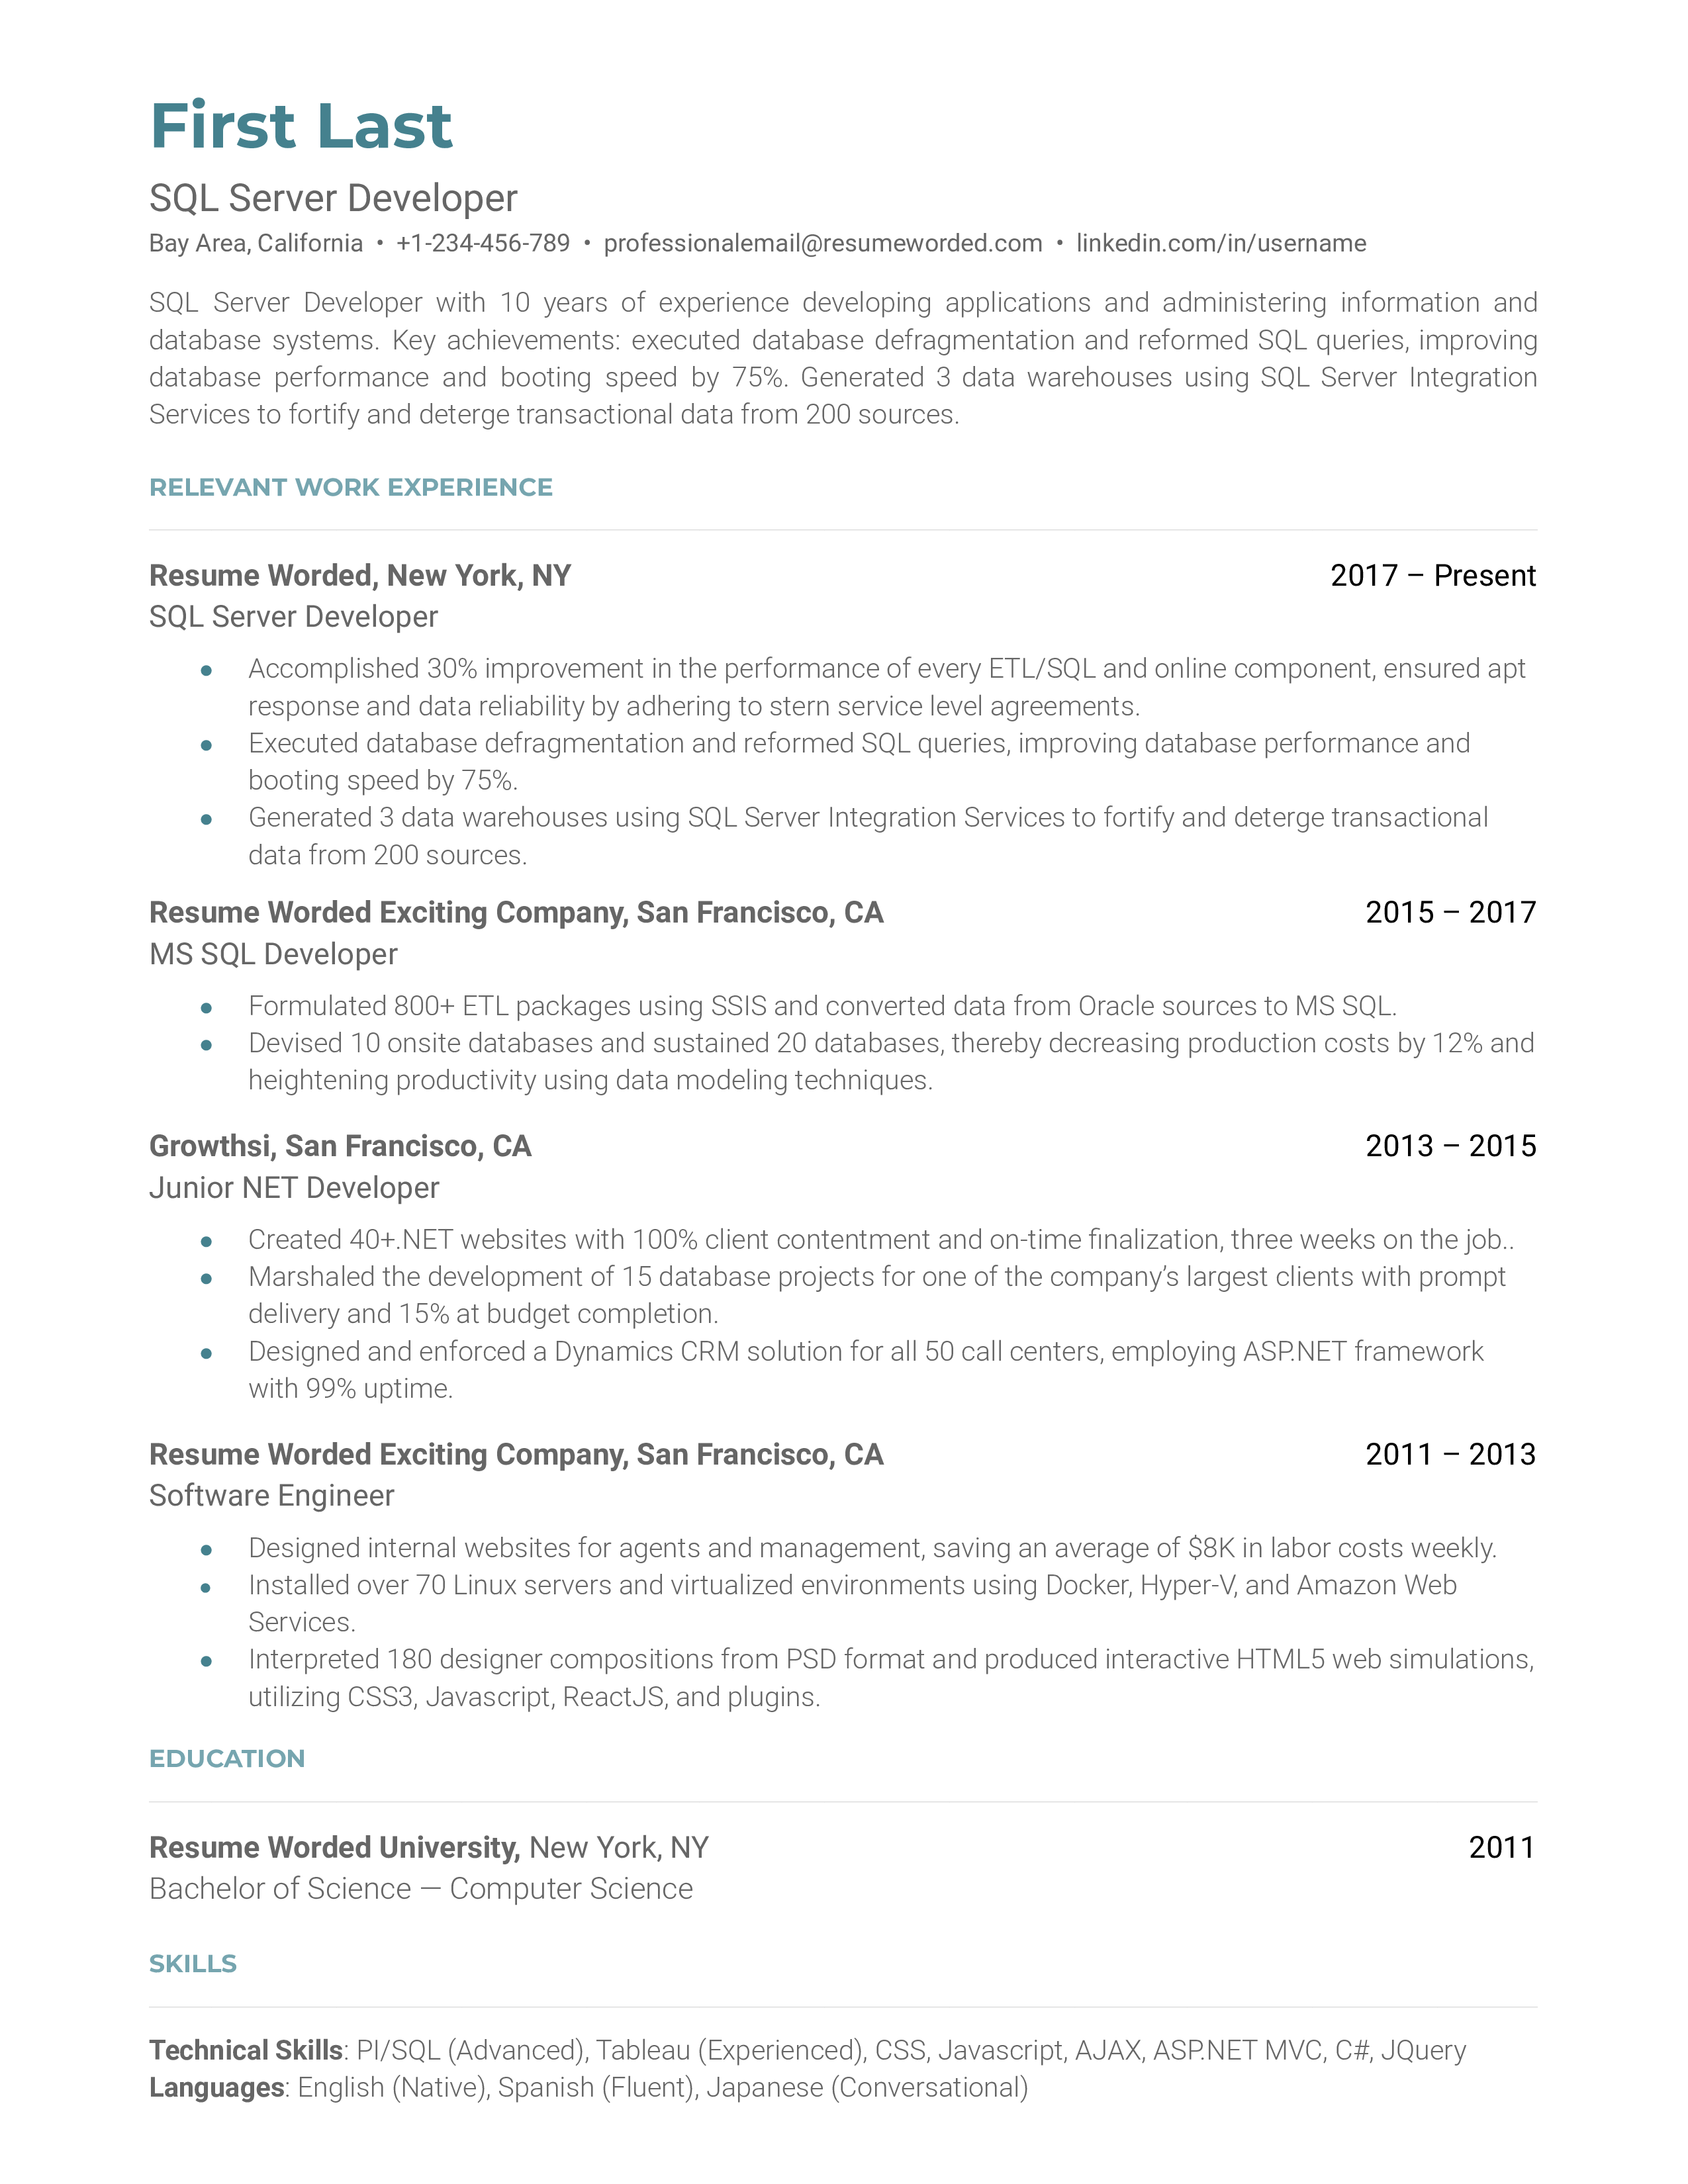 A SQL server developer resume with a degree in computer science and previous experience in software engineering and NET development. 